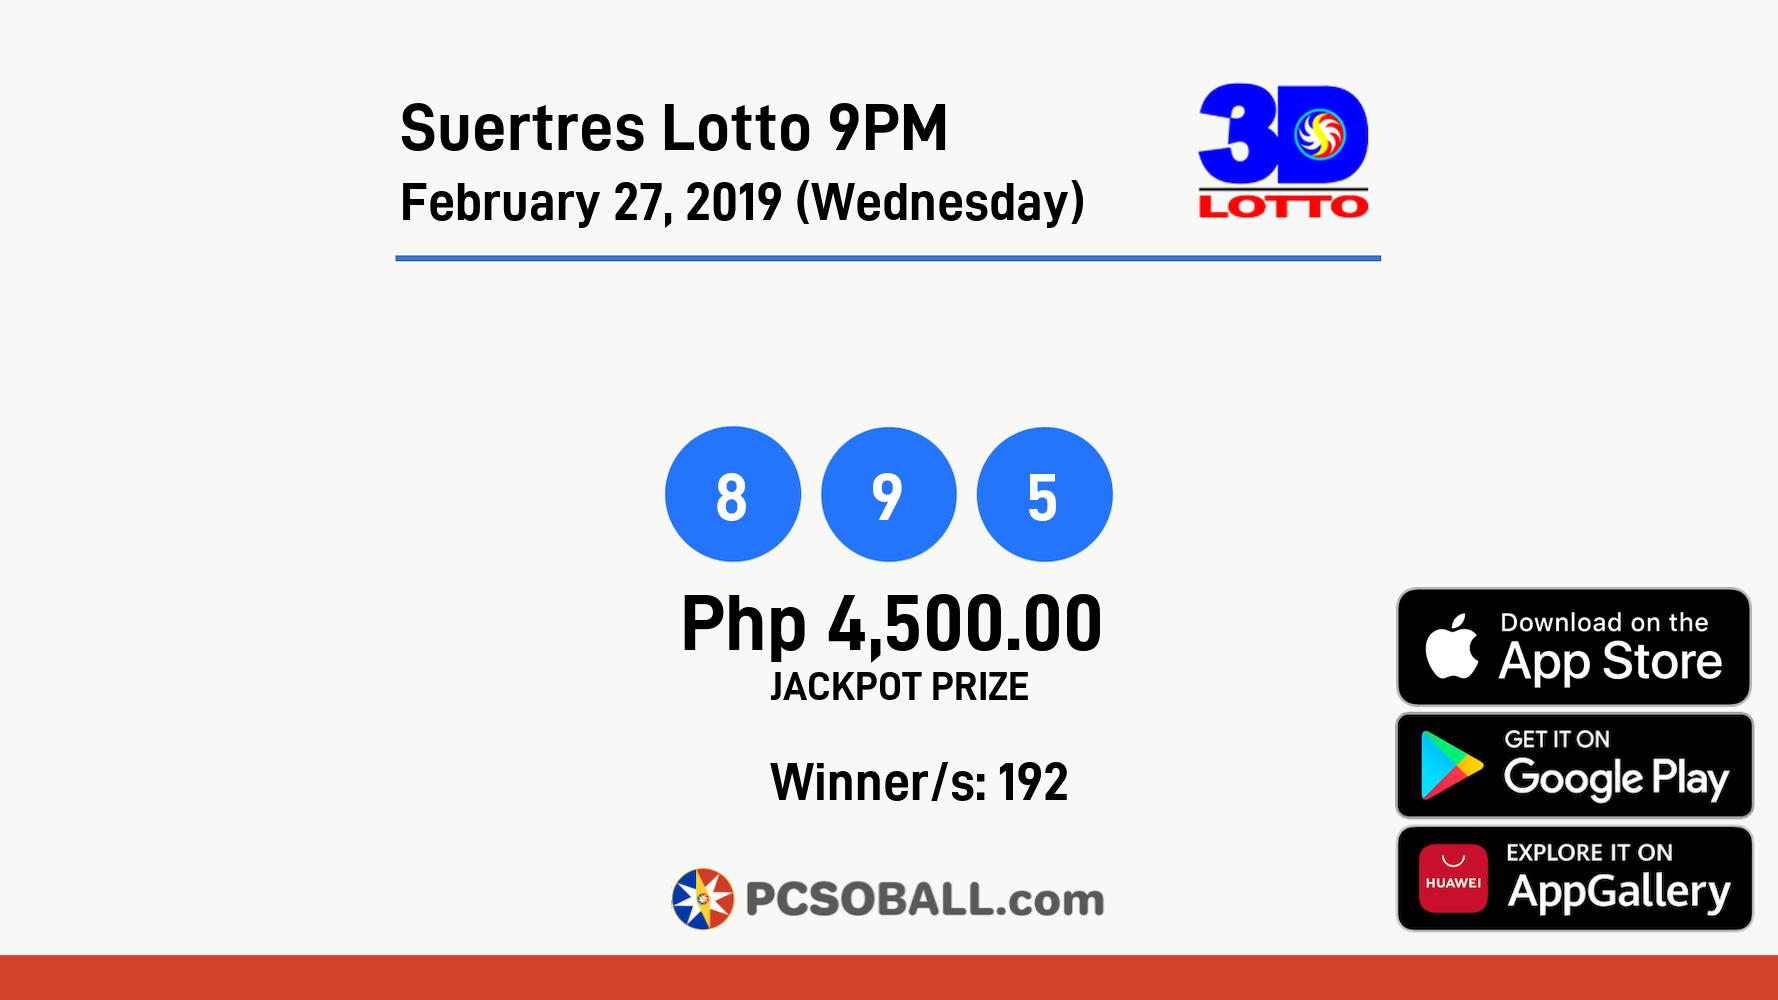 Suertres Lotto 9PM February 27, 2019 (Wednesday) Result